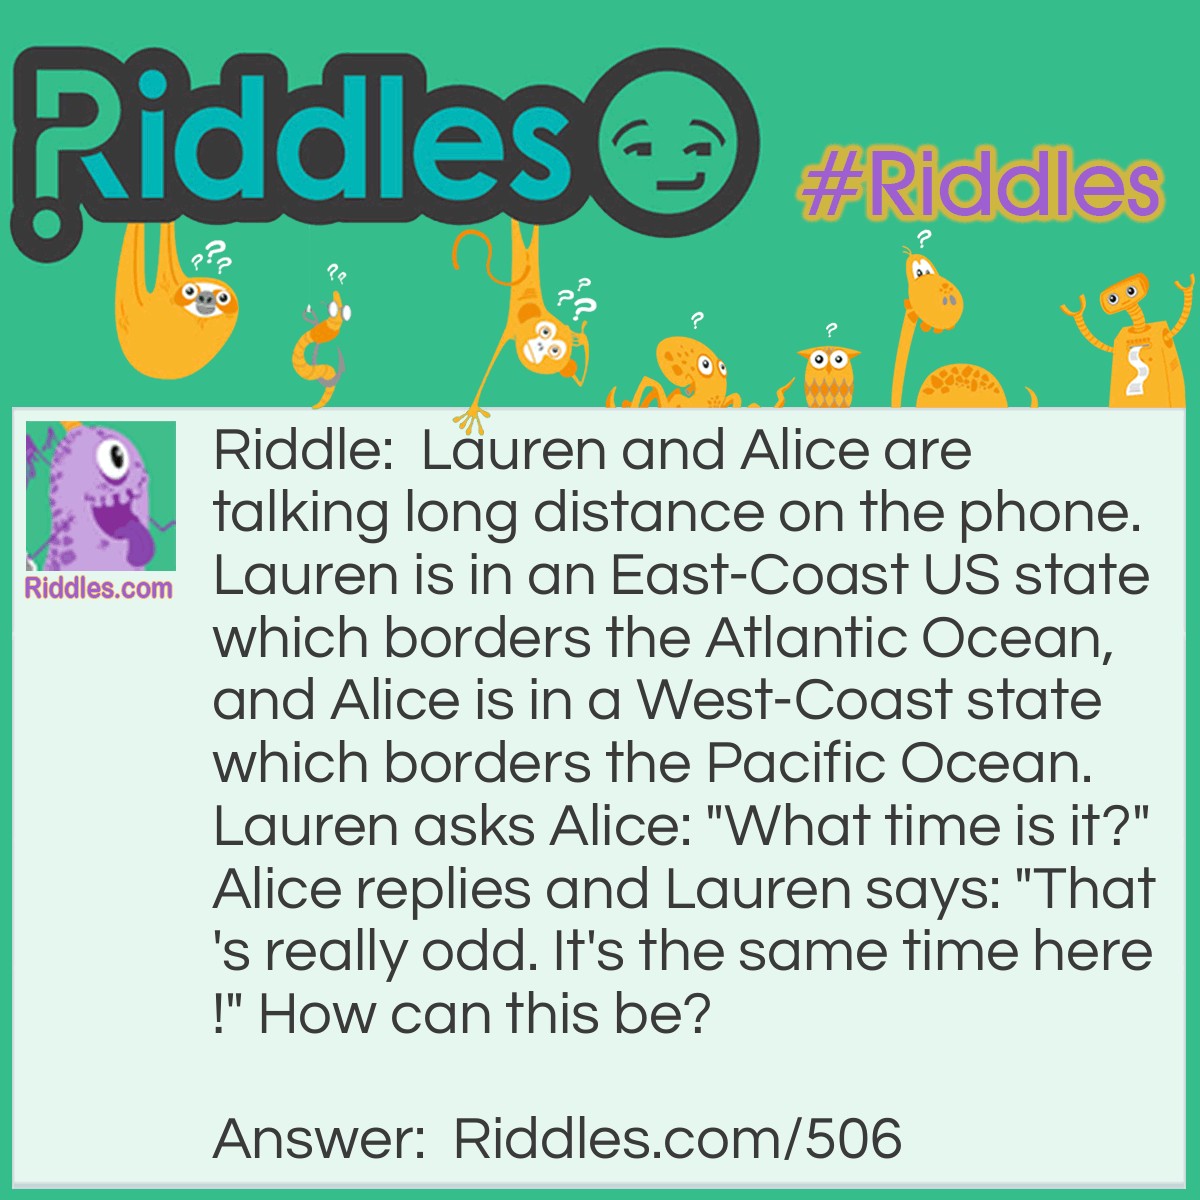 Riddle: Lauren and Alice are talking long distance on the phone. Lauren is in an East-Coast US state which borders the Atlantic Ocean, and Alice is in a West-Coast state which borders the Pacific Ocean. Lauren asks Alice: "What time is it?" Alice replies and Lauren says: "That's really odd. It's the same time here!" How can this be? Answer: Alice is in Eastern Oregon (in Mountain time) and Lauren is in Western Florida (in Central time). It is the night that daylight-savings time changes back to standard time any time after 1:00 and before 2:00 AM.